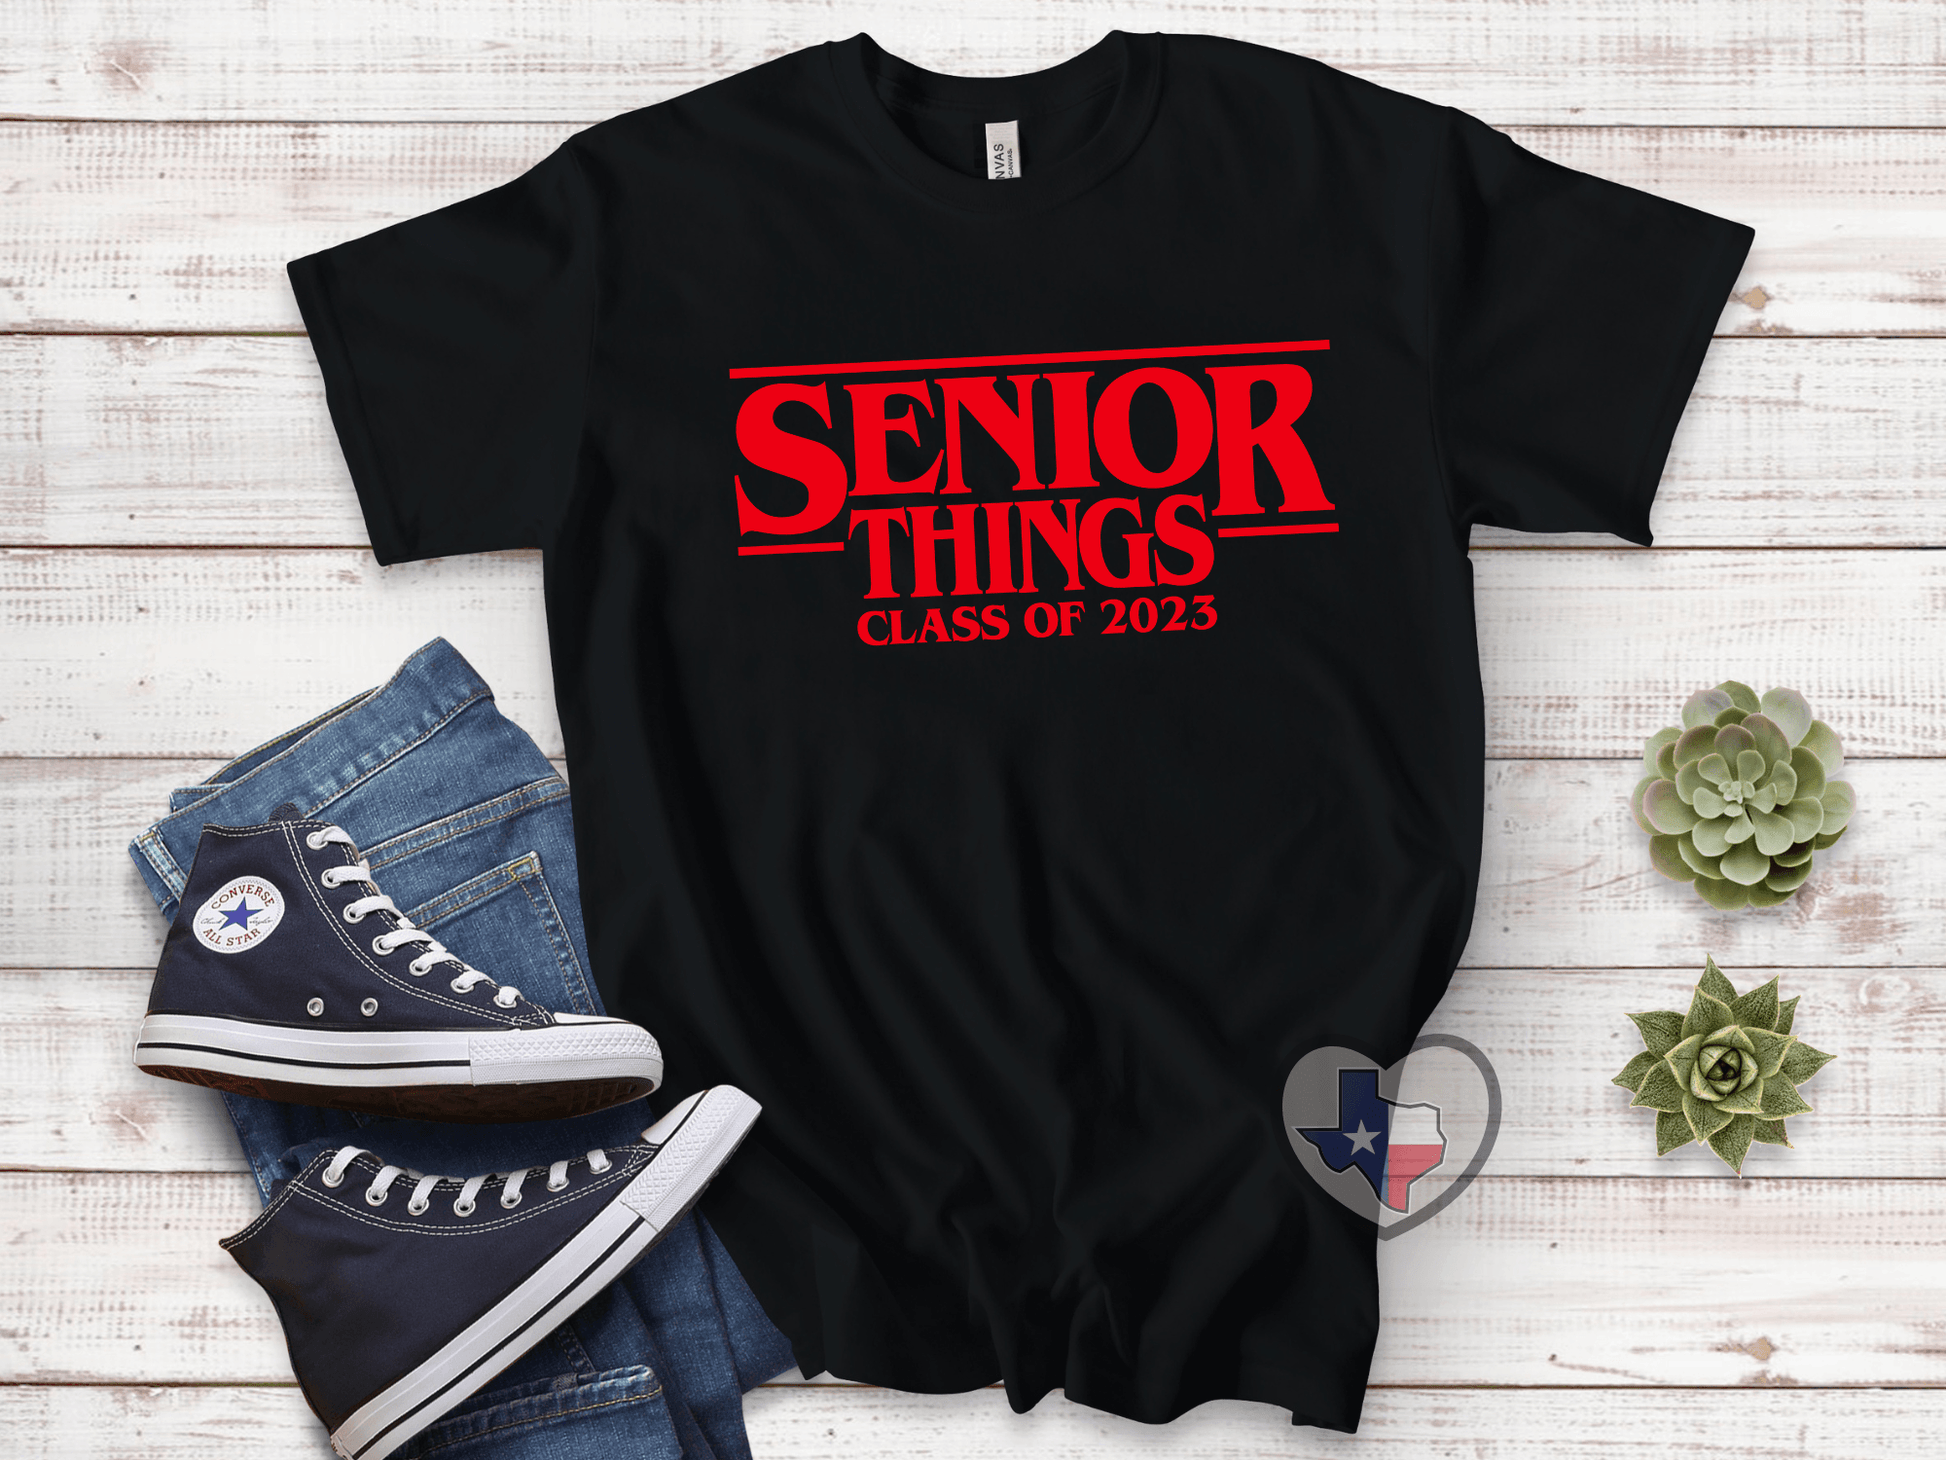 Senior Things (Bright Red) - Texas Transfers and Designs